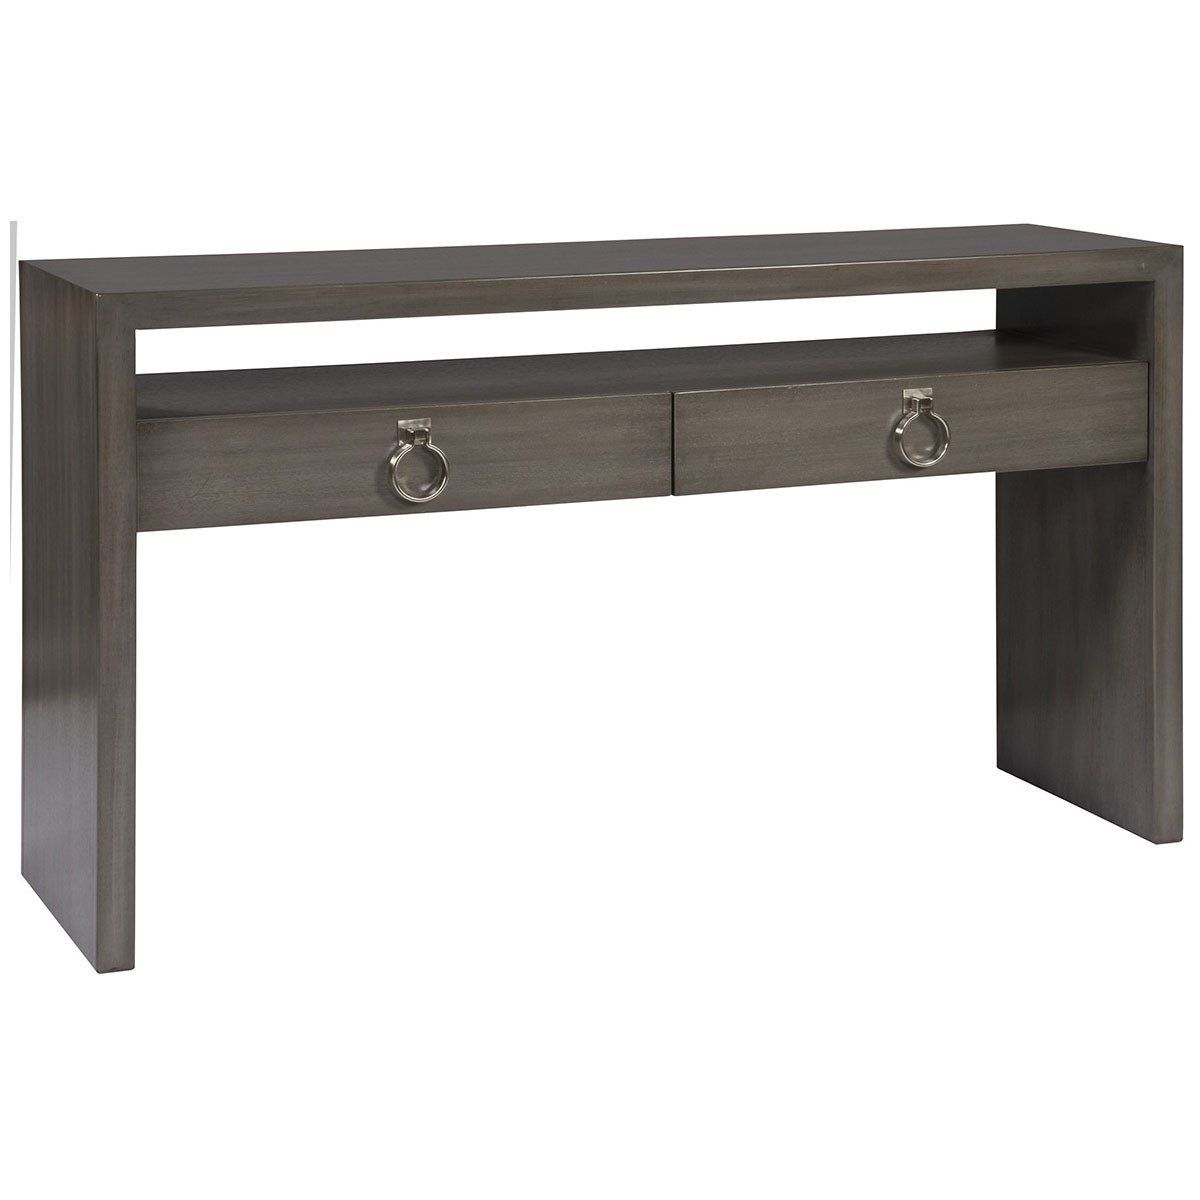 Vanguard Furniture Margo Console | Products | Furniture, Console Inside Parsons Concrete Top & Elm Base 48x16 Console Tables (View 7 of 30)